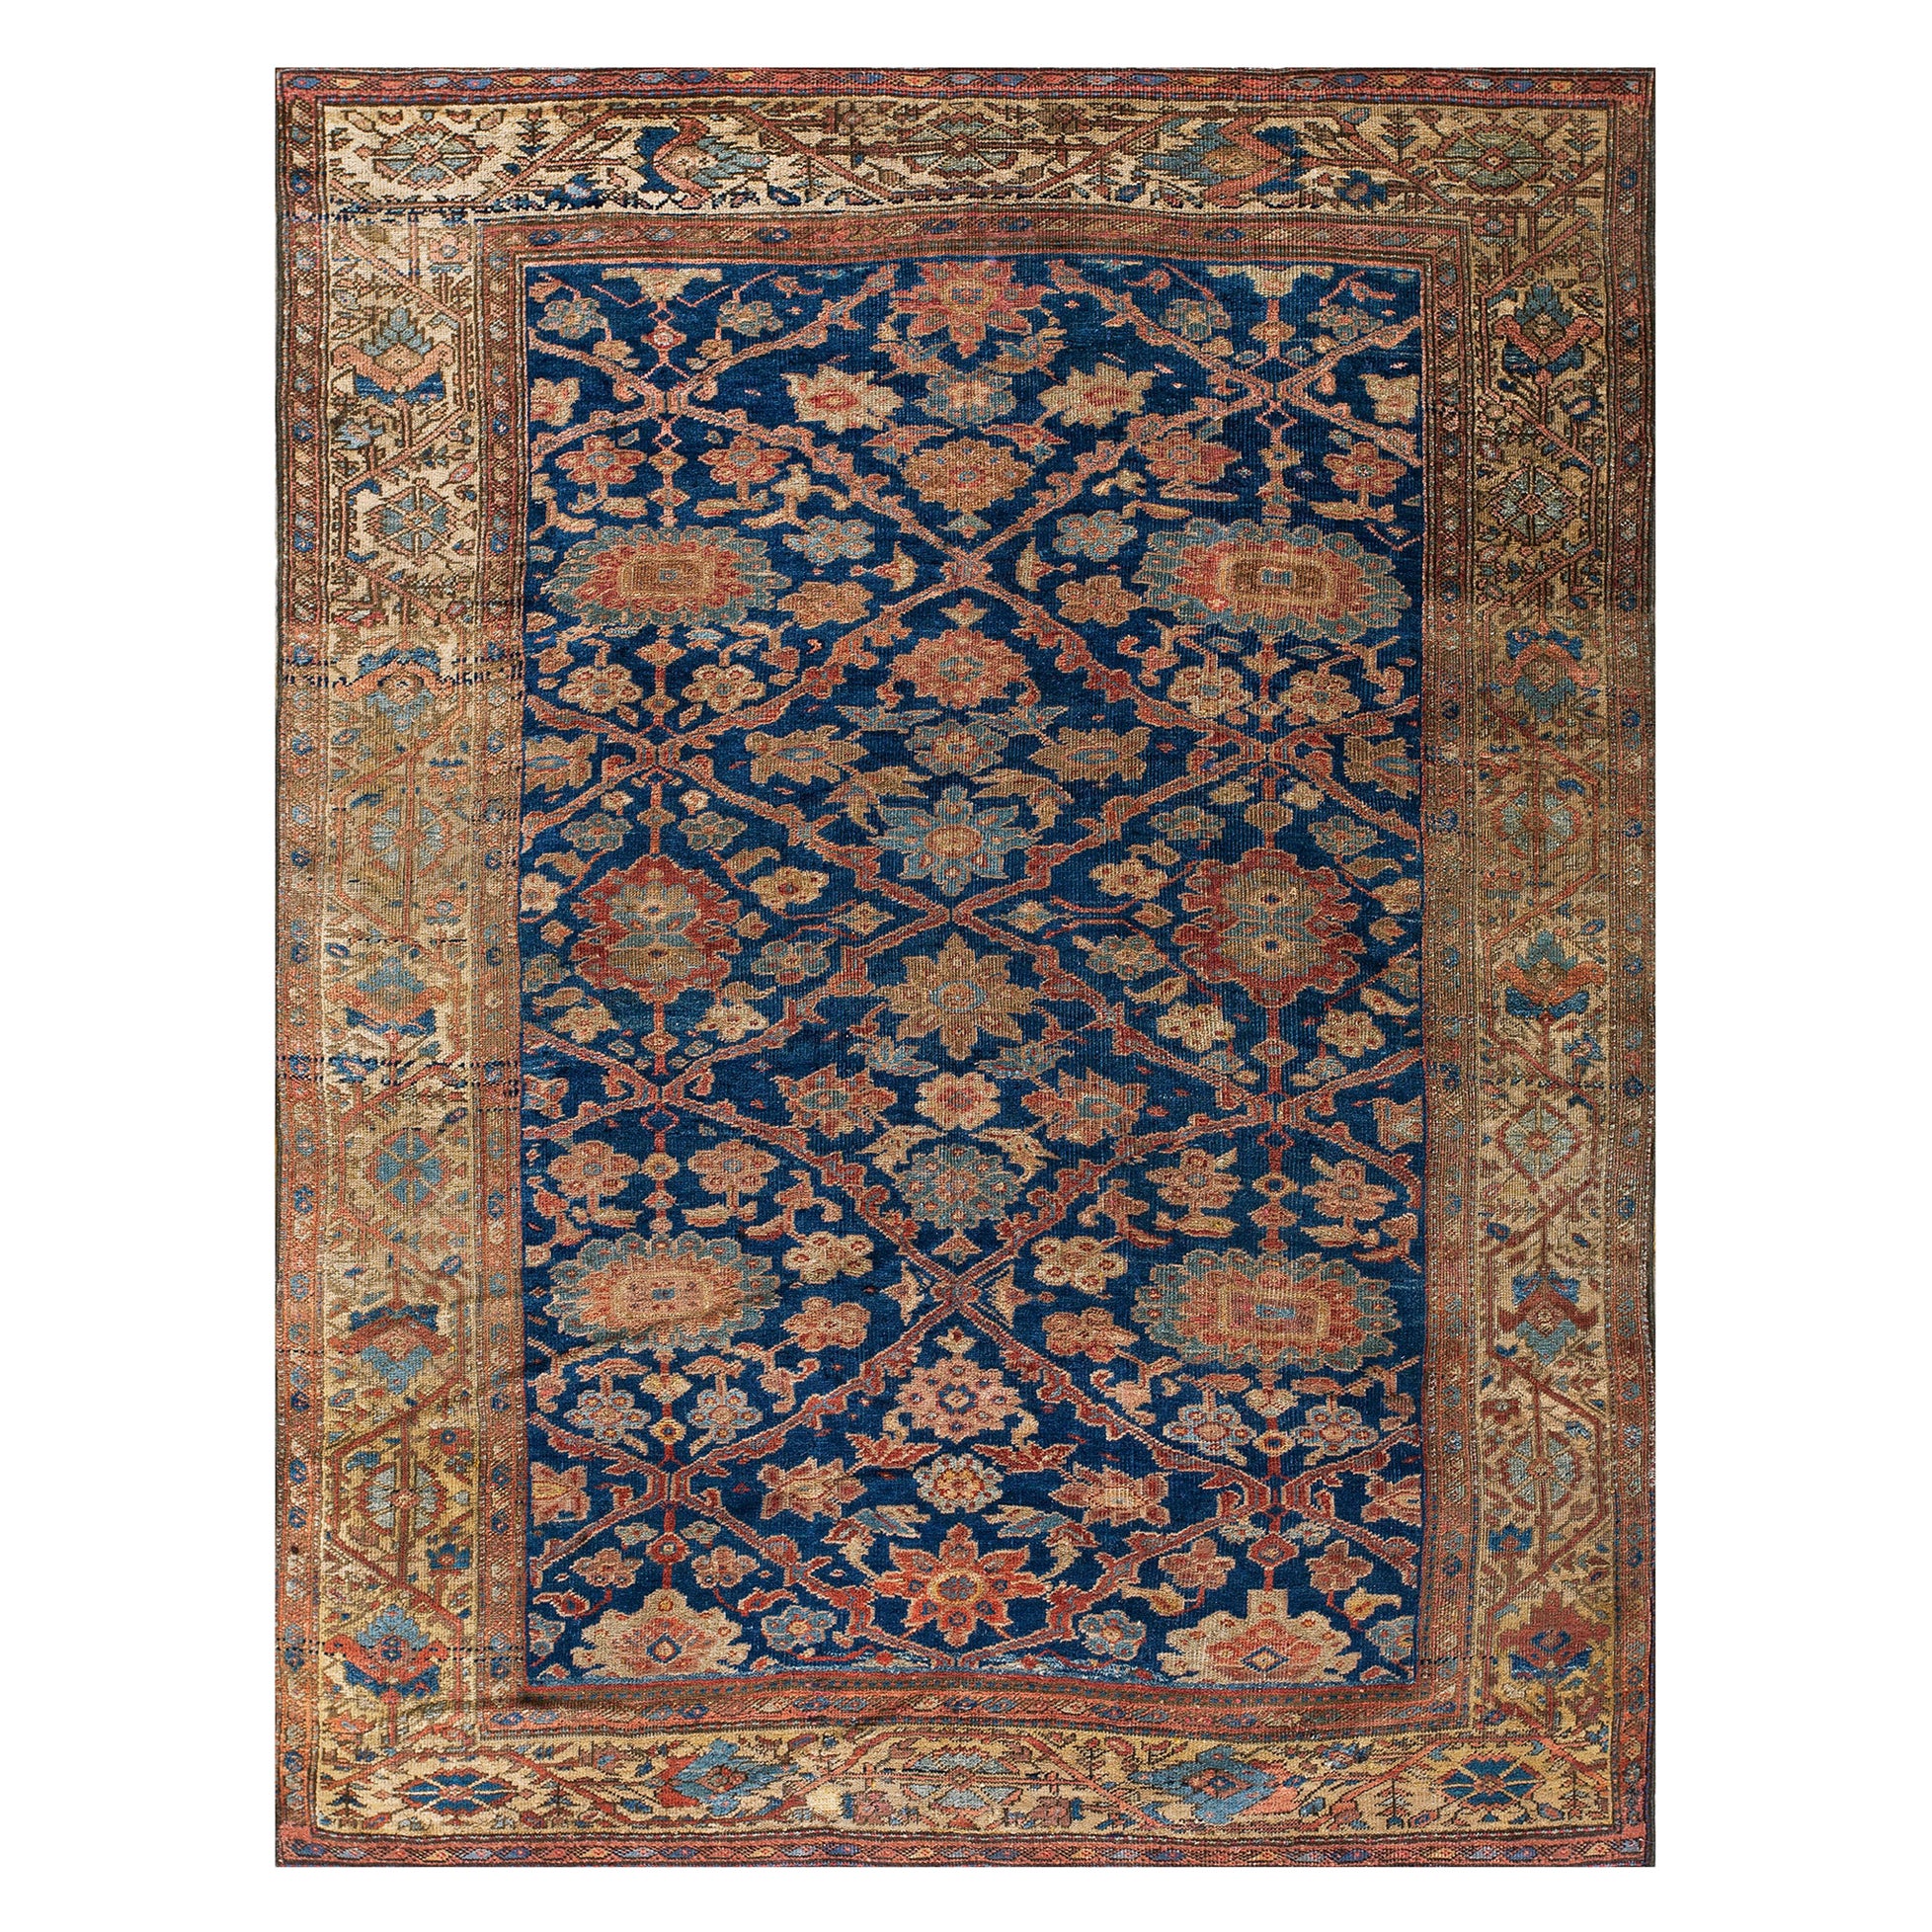 Late 19th Century Persian Sultanabad Carpet ( 6'2" x 7'9" - 188 x 236 cm ) For Sale